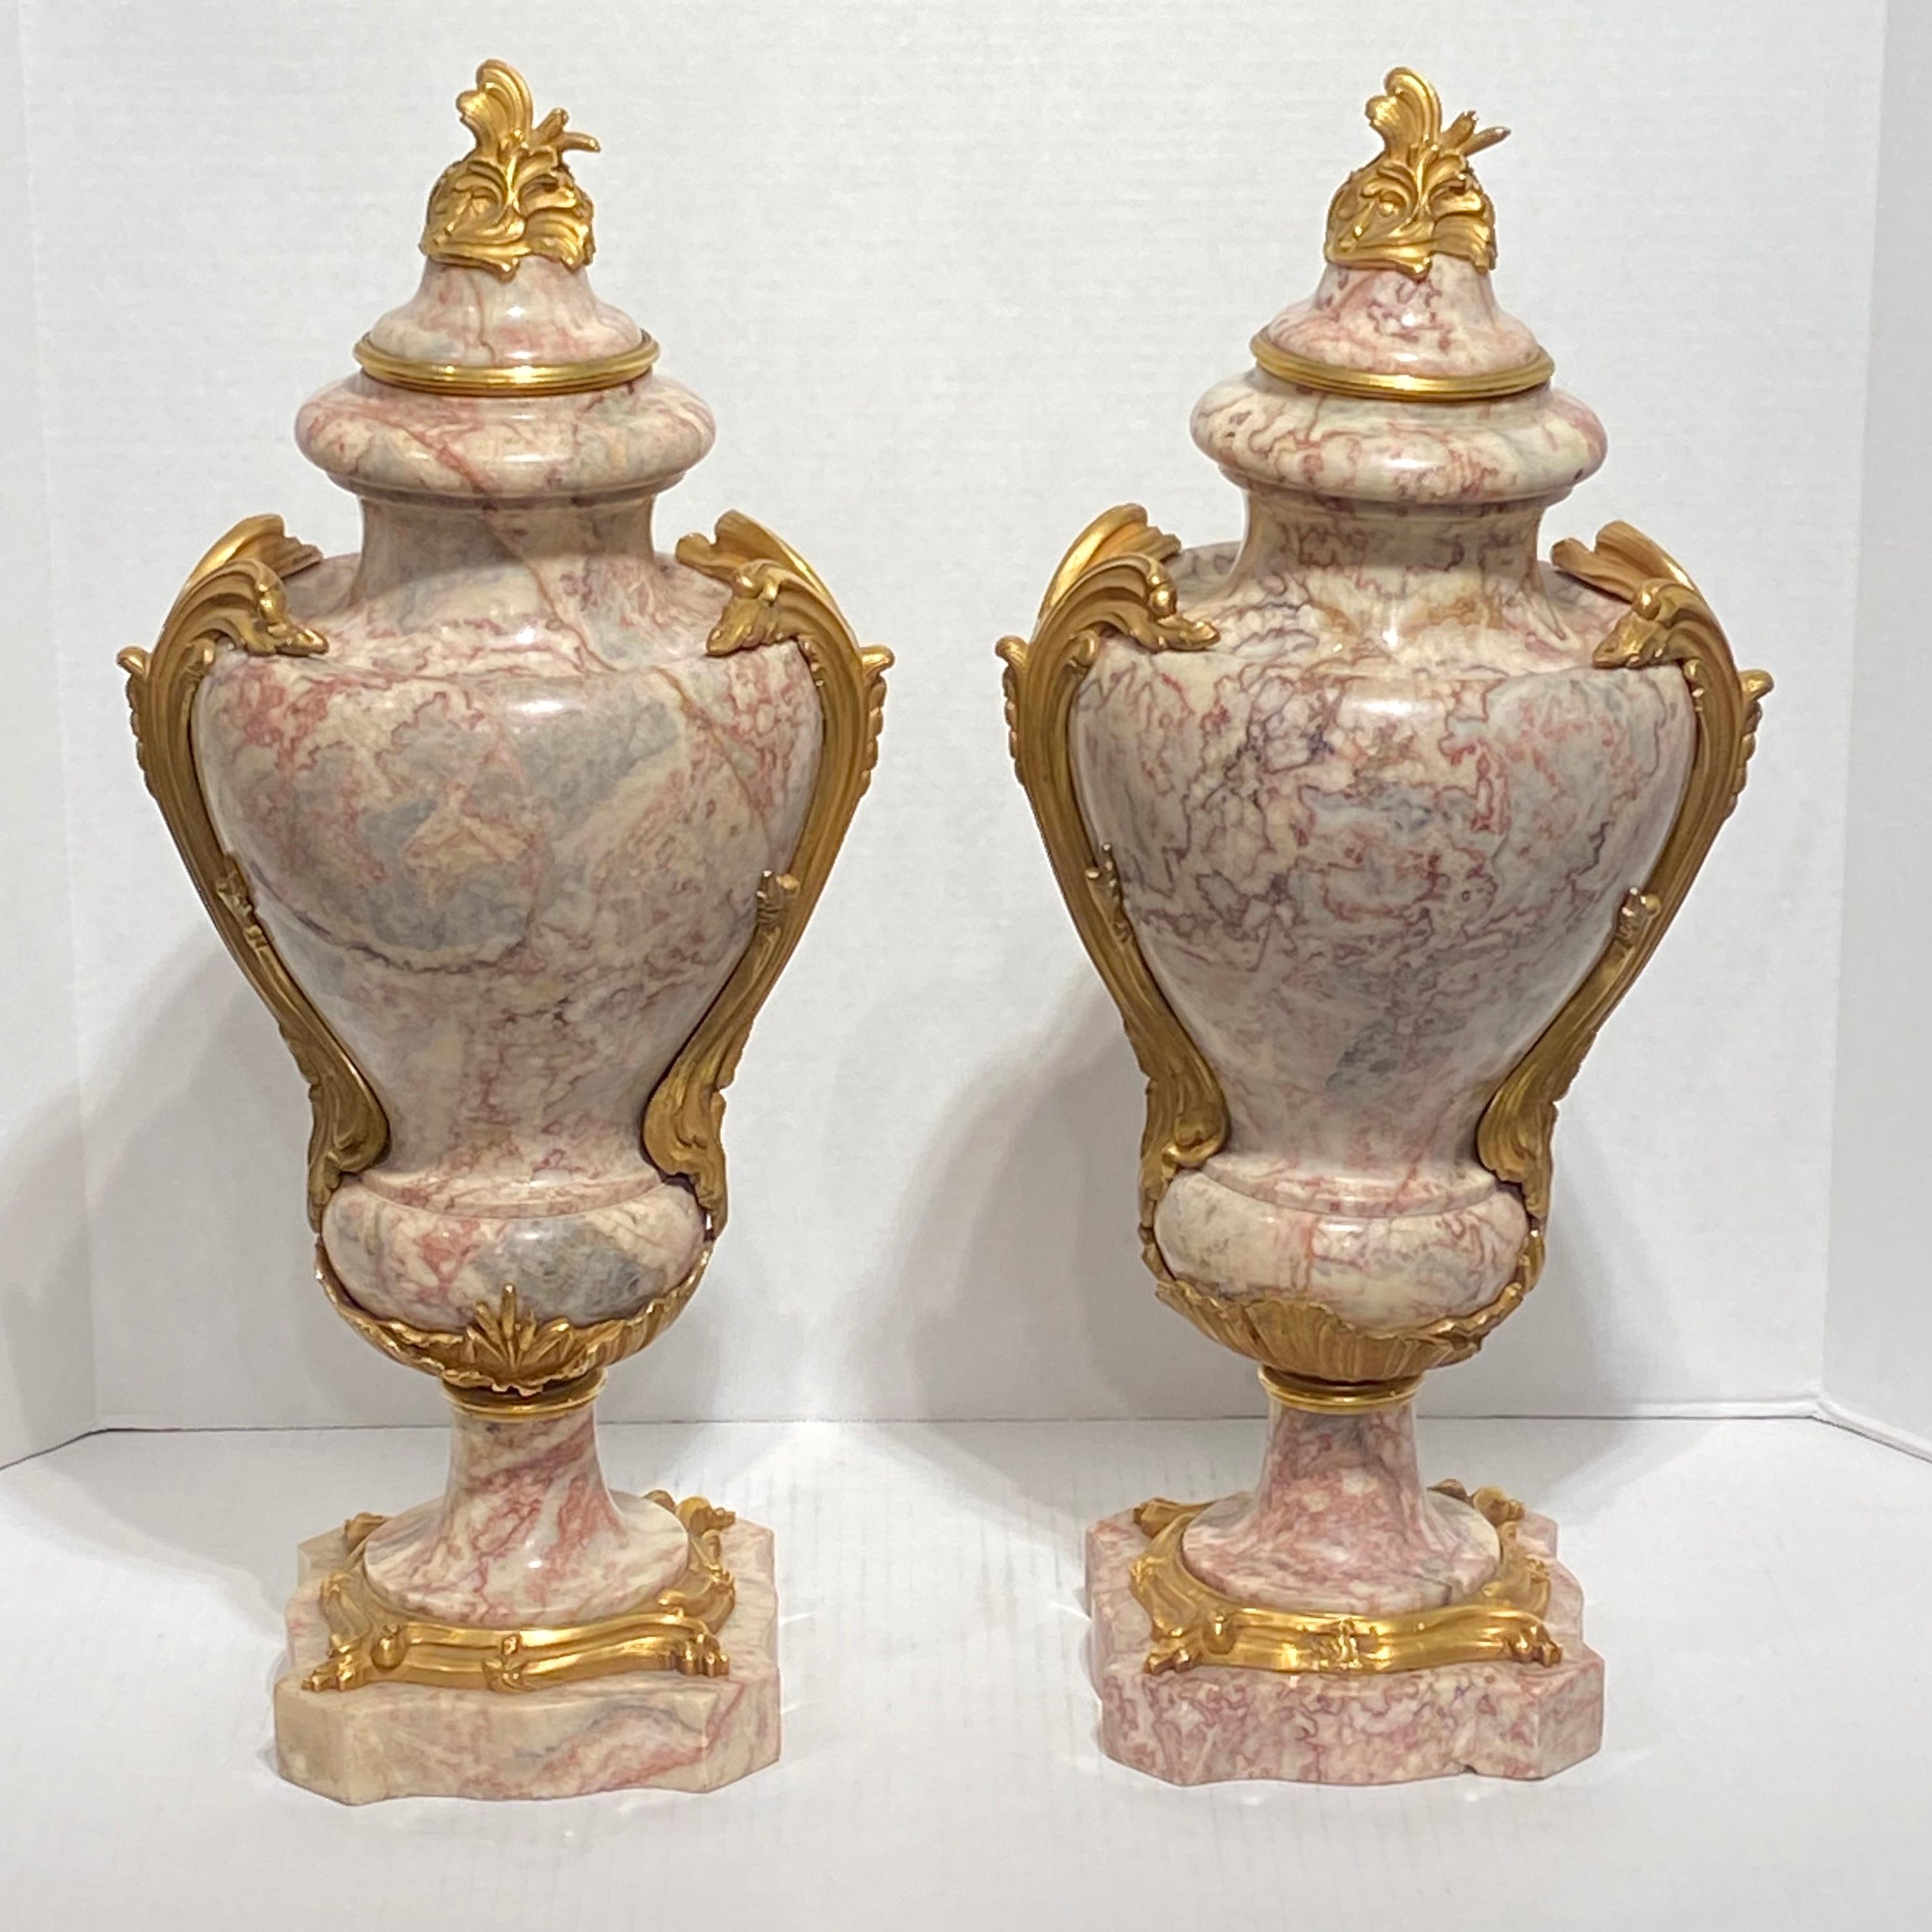 Pair of Louis XV style bronze and marble urns.
Stock number: DA163.